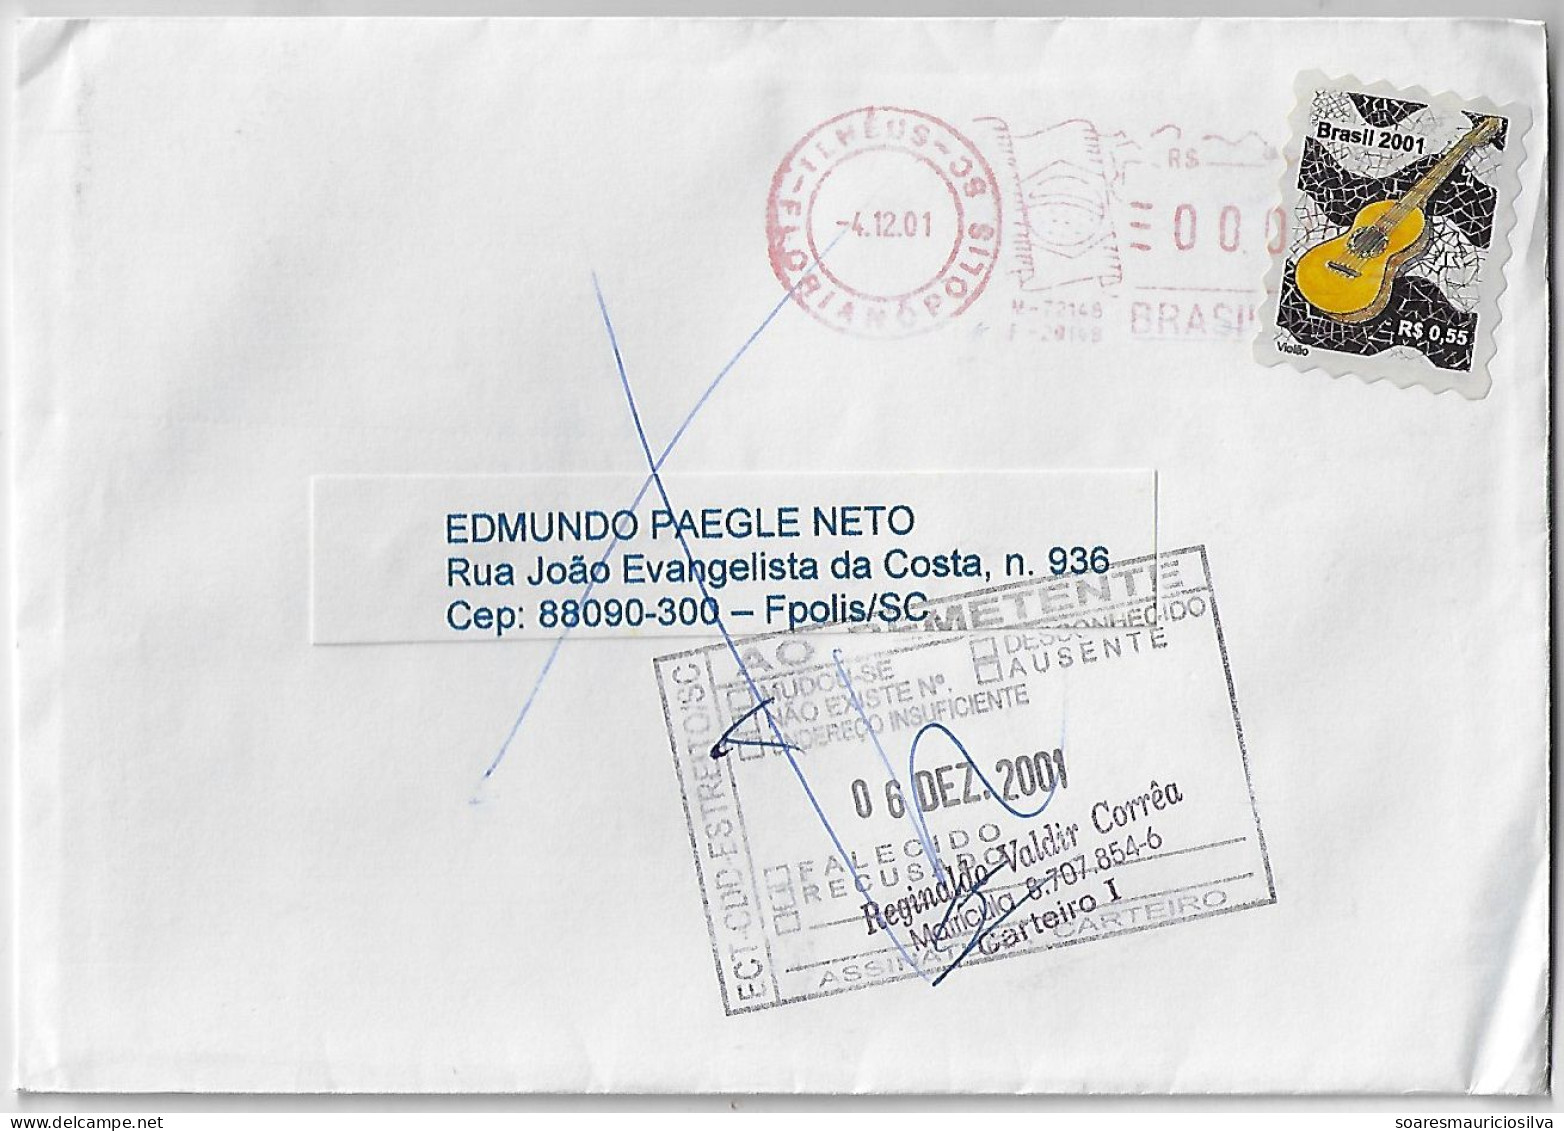 Brazil 2001 Returned Cover Florianópolis Ilhéus Agency Stamp Musical Instrument Guitar Canceled By Meter Stamp Zeo Value - Covers & Documents